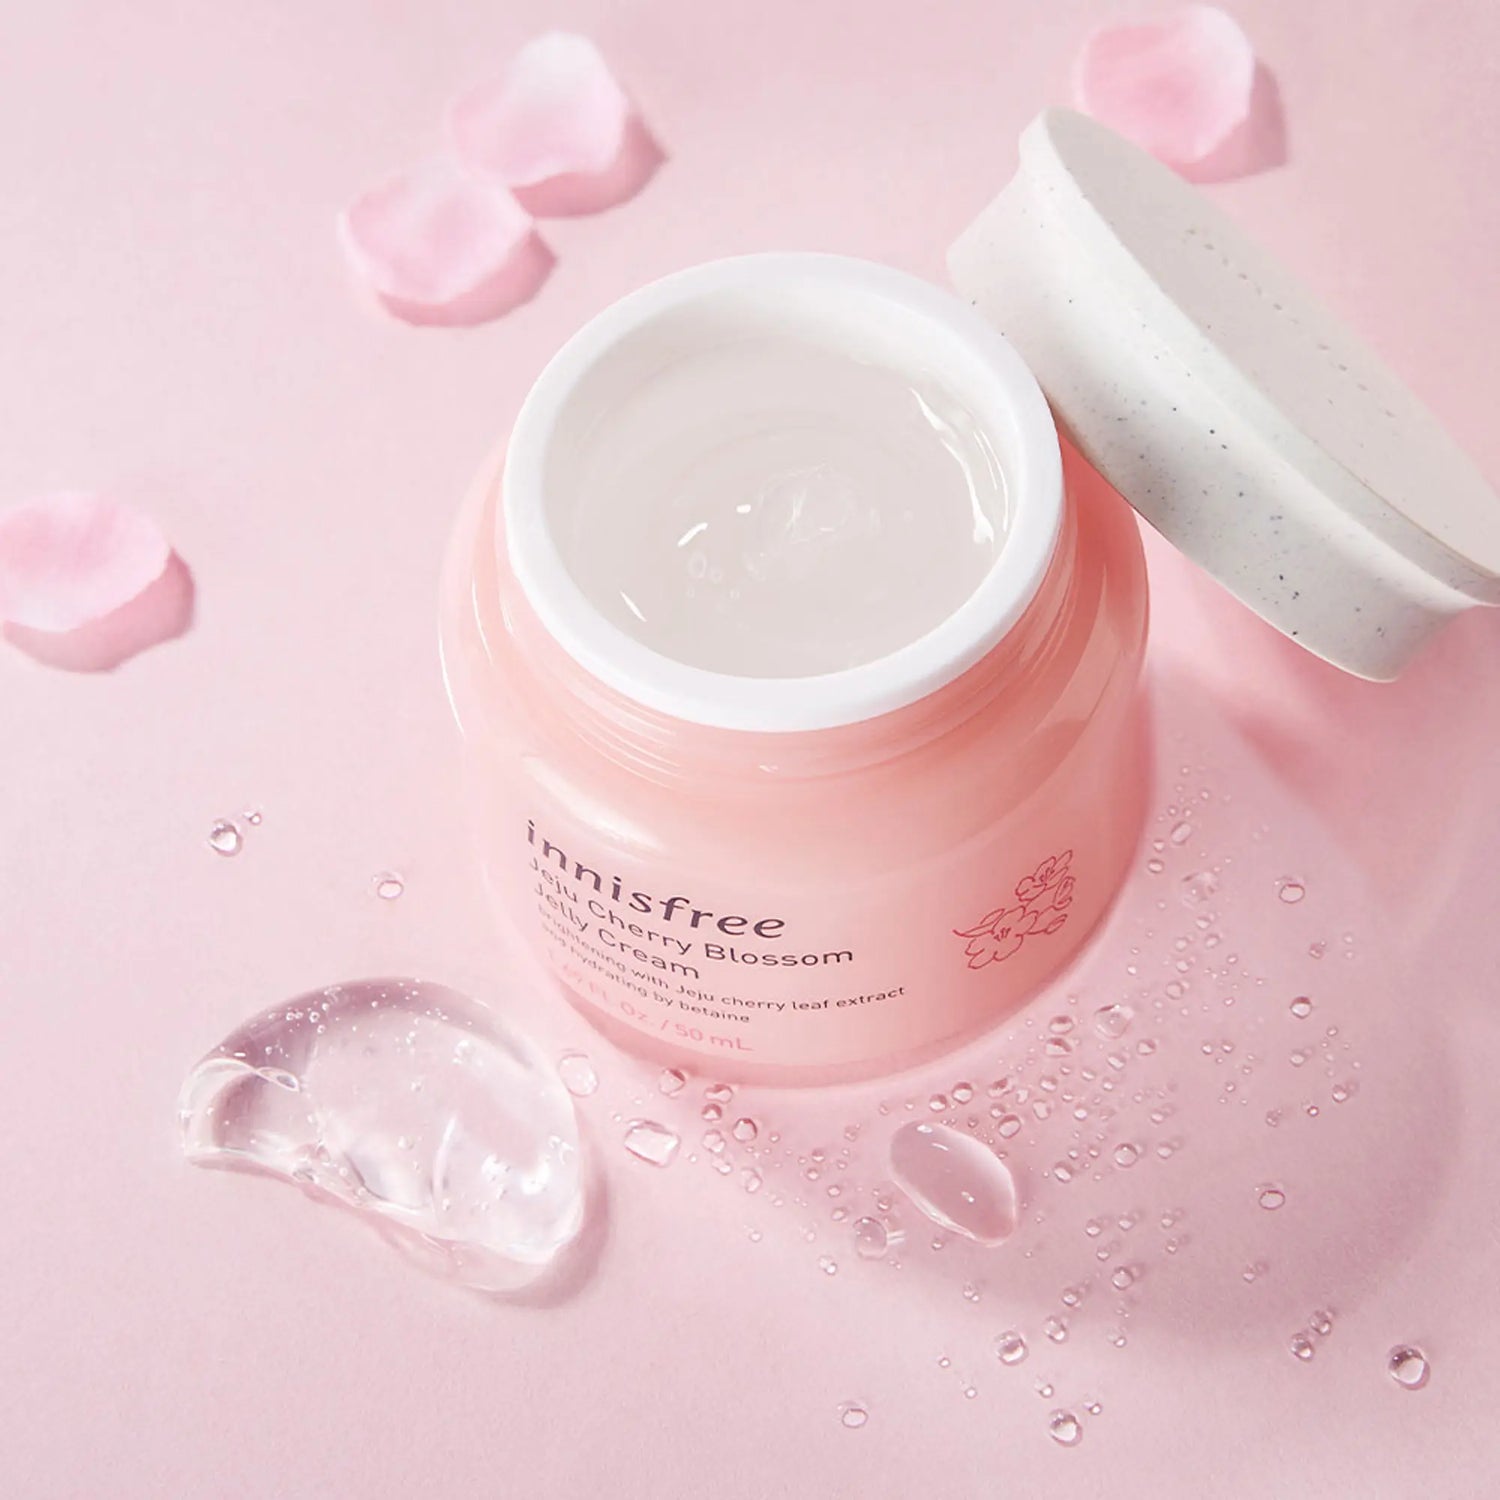 A clear water-jelly cream that instantly makes your skin bouncy & dewy with a pure & clean glow without leaving any residue.